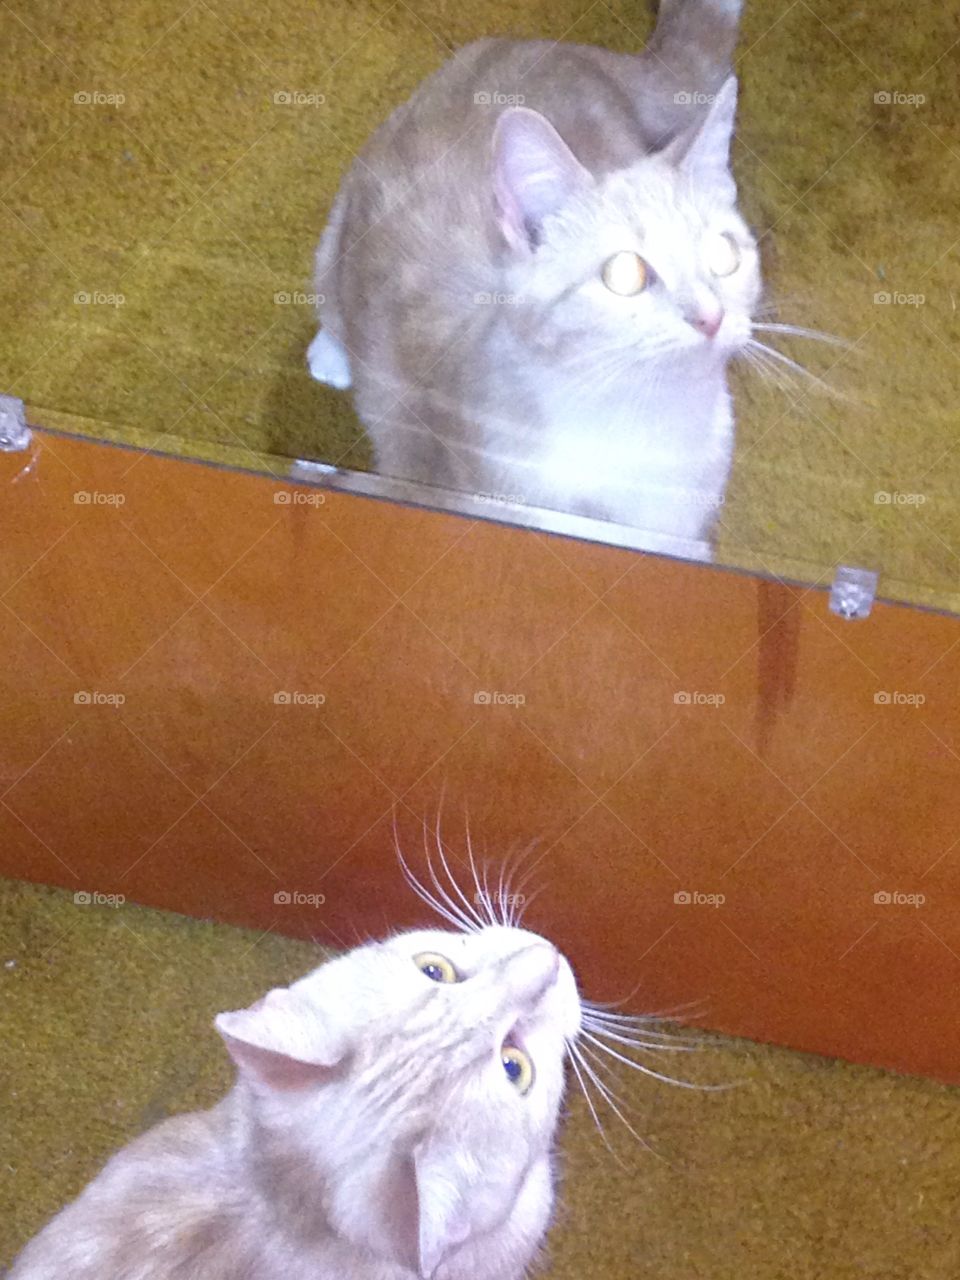 Reflection of kitty